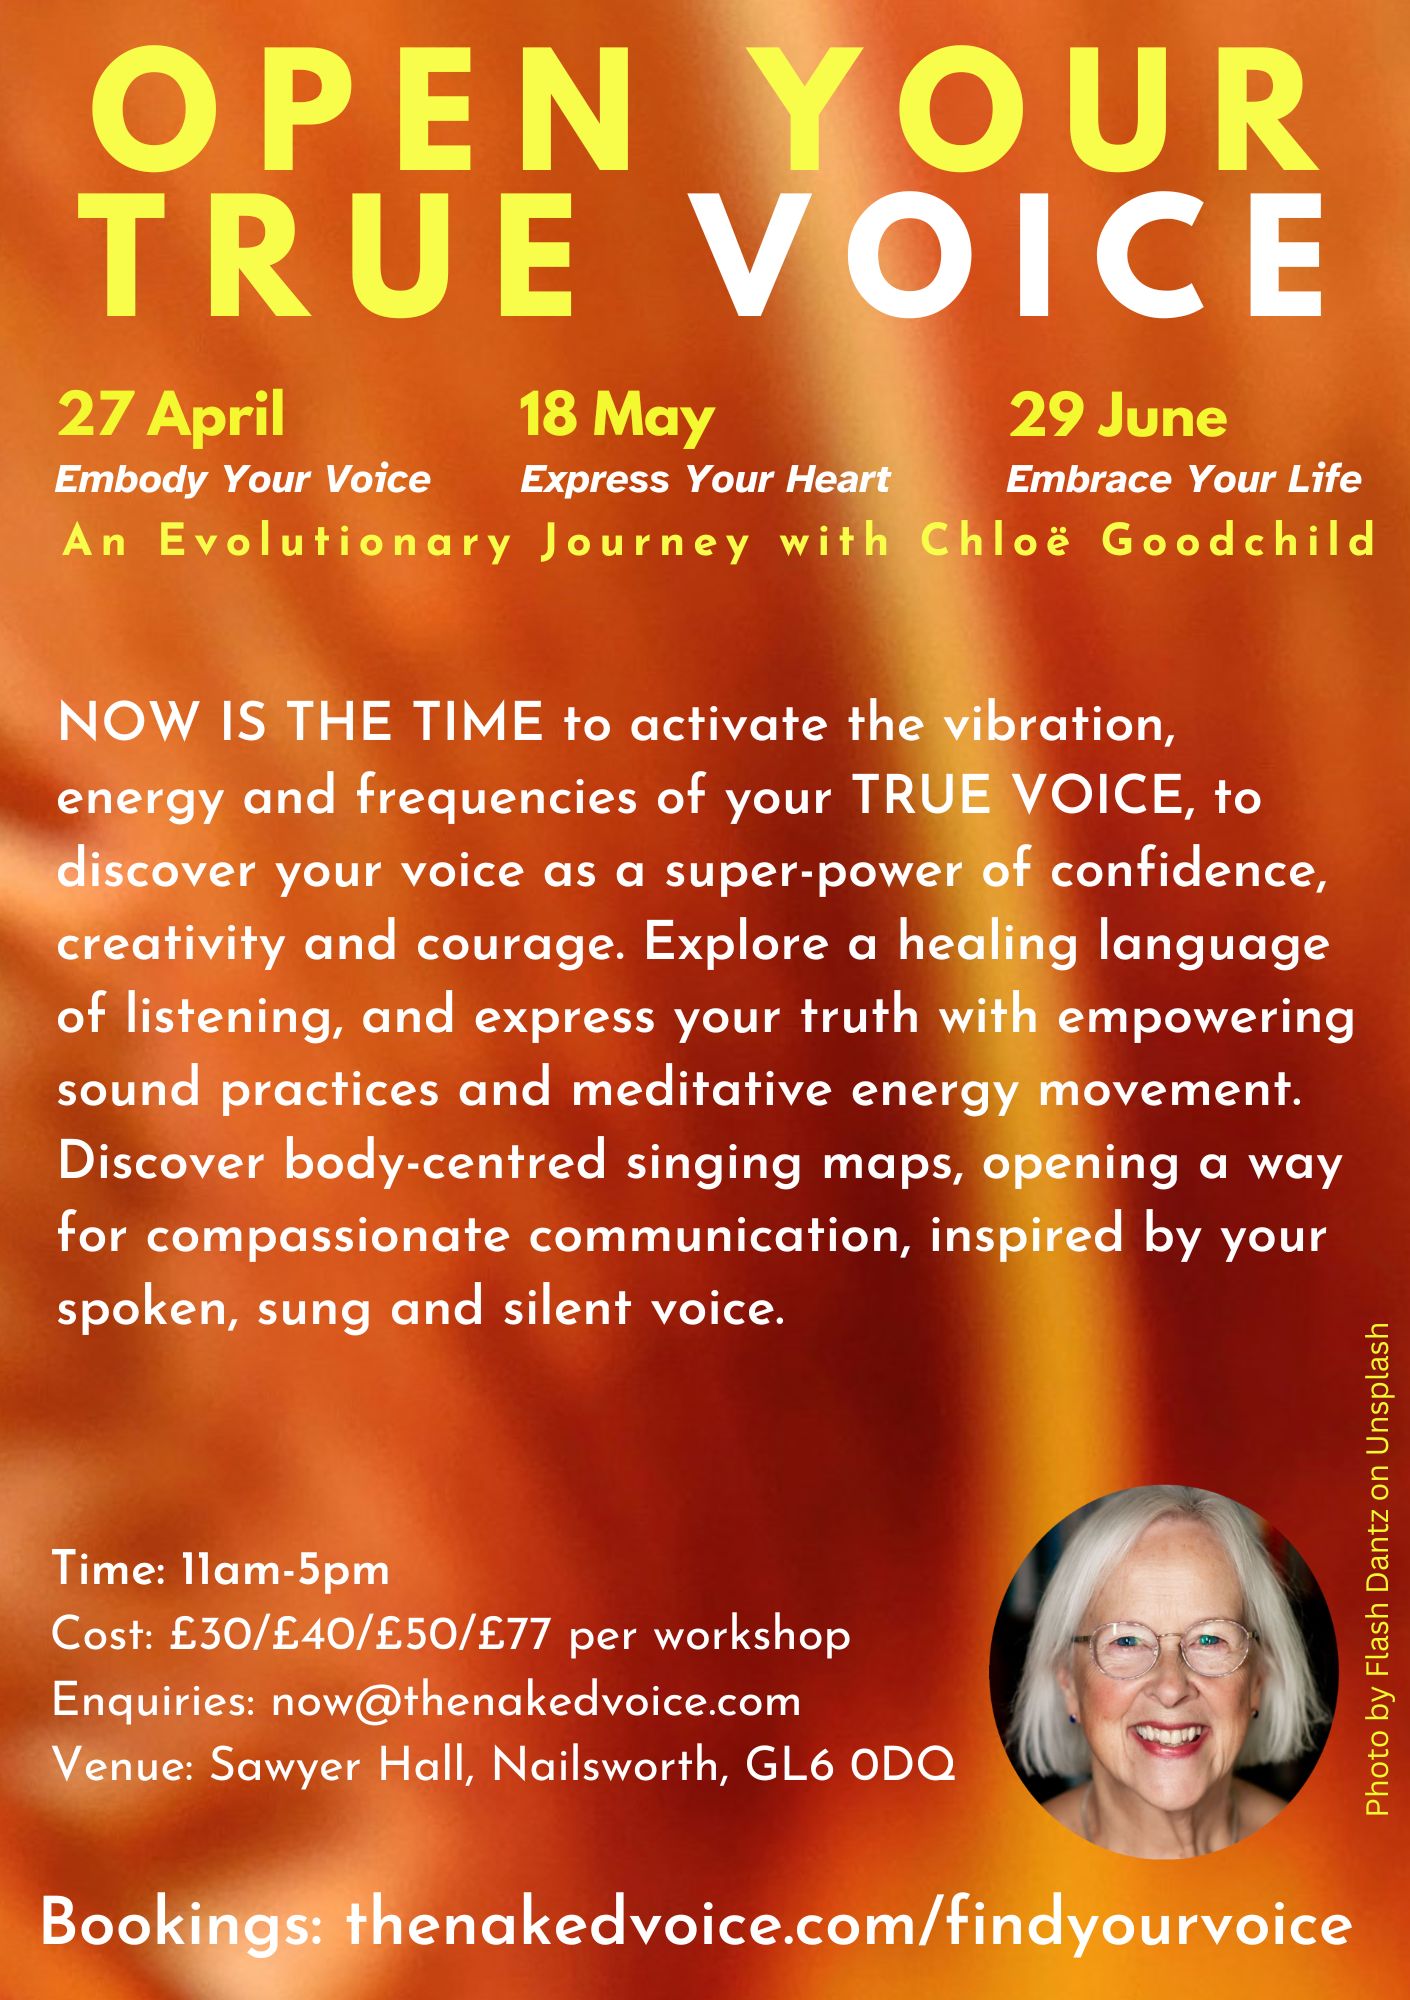 GLOUCESTERSHIRE - OPEN YOUR TRUE VOICE: EMBODY YOUR VOICE